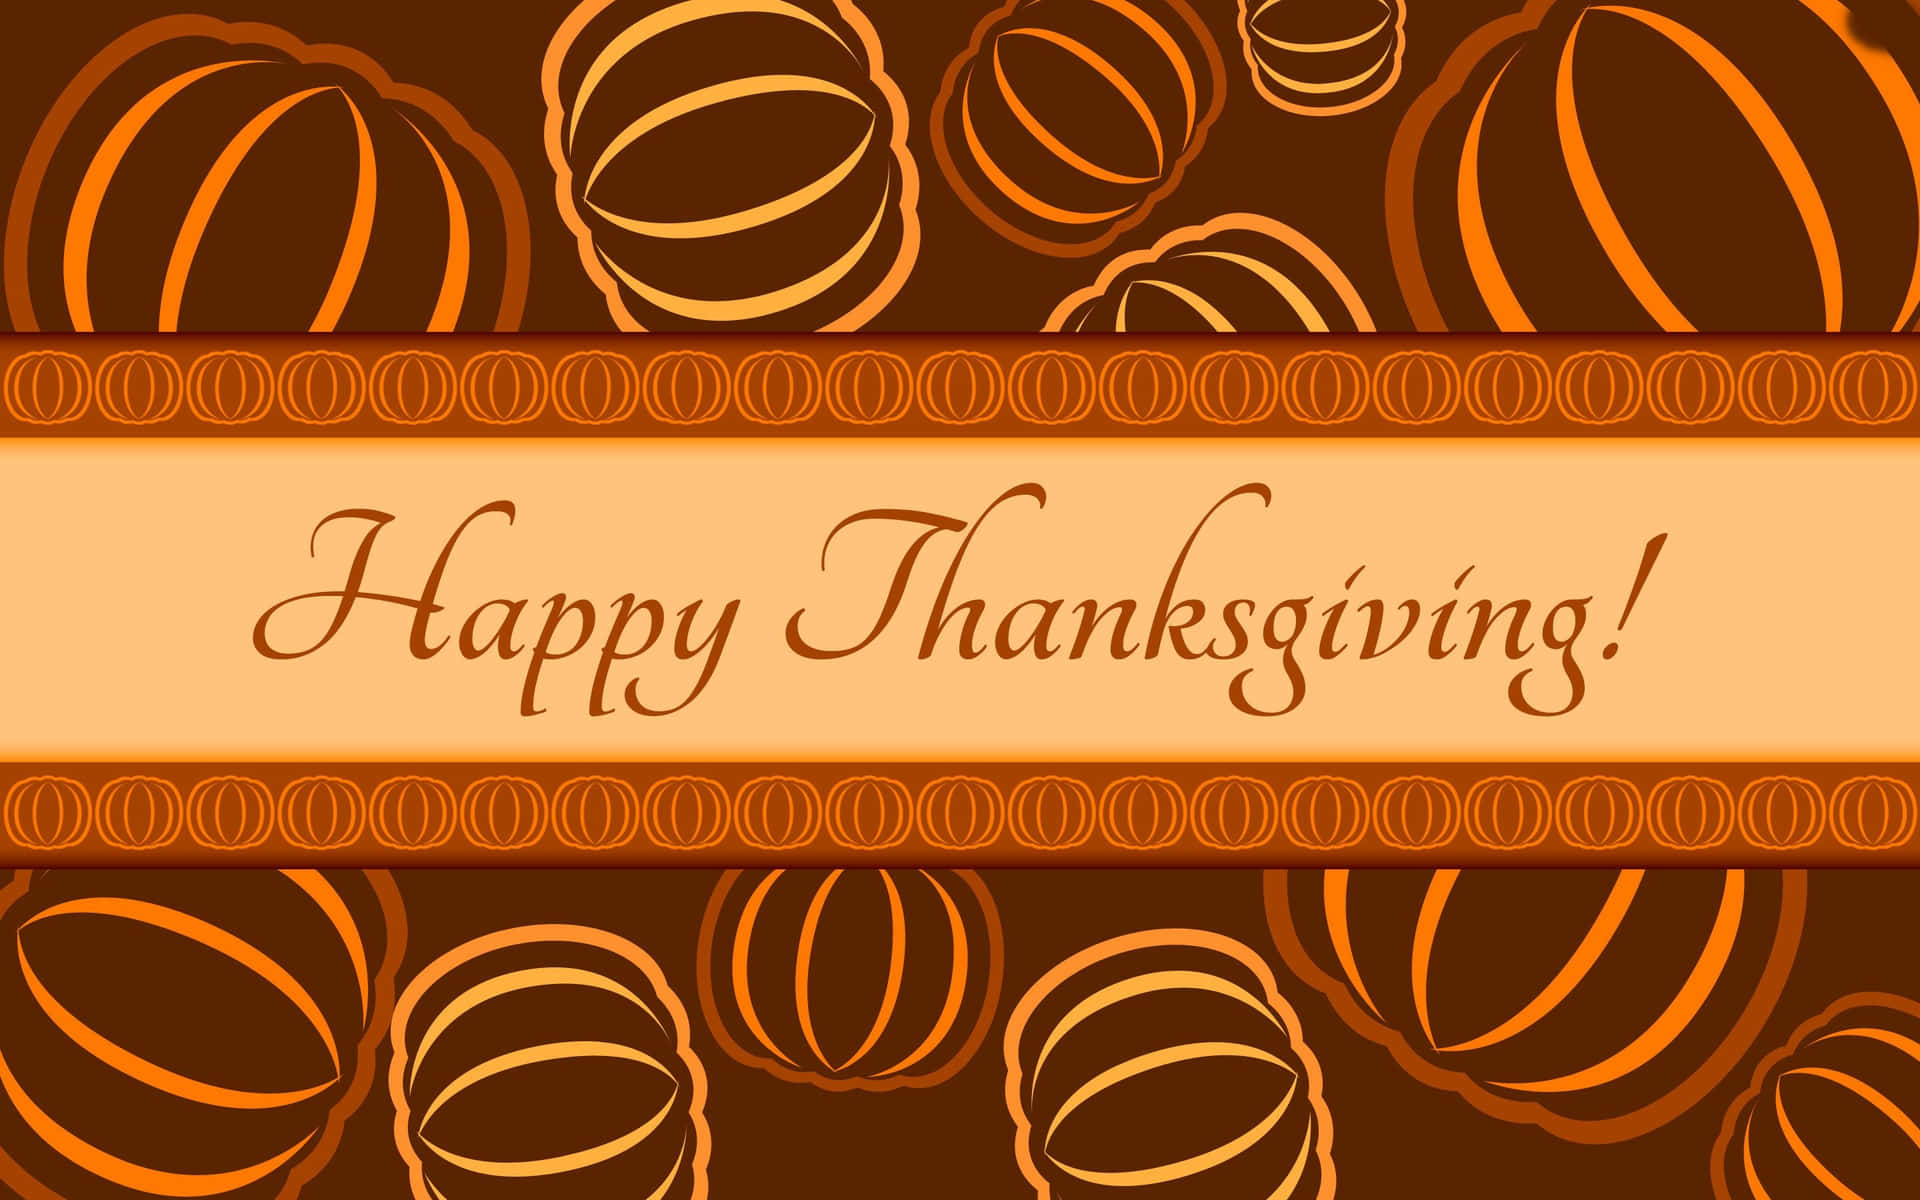 Happy Thanksgiving Greeting Card Pumpkin Outline Background